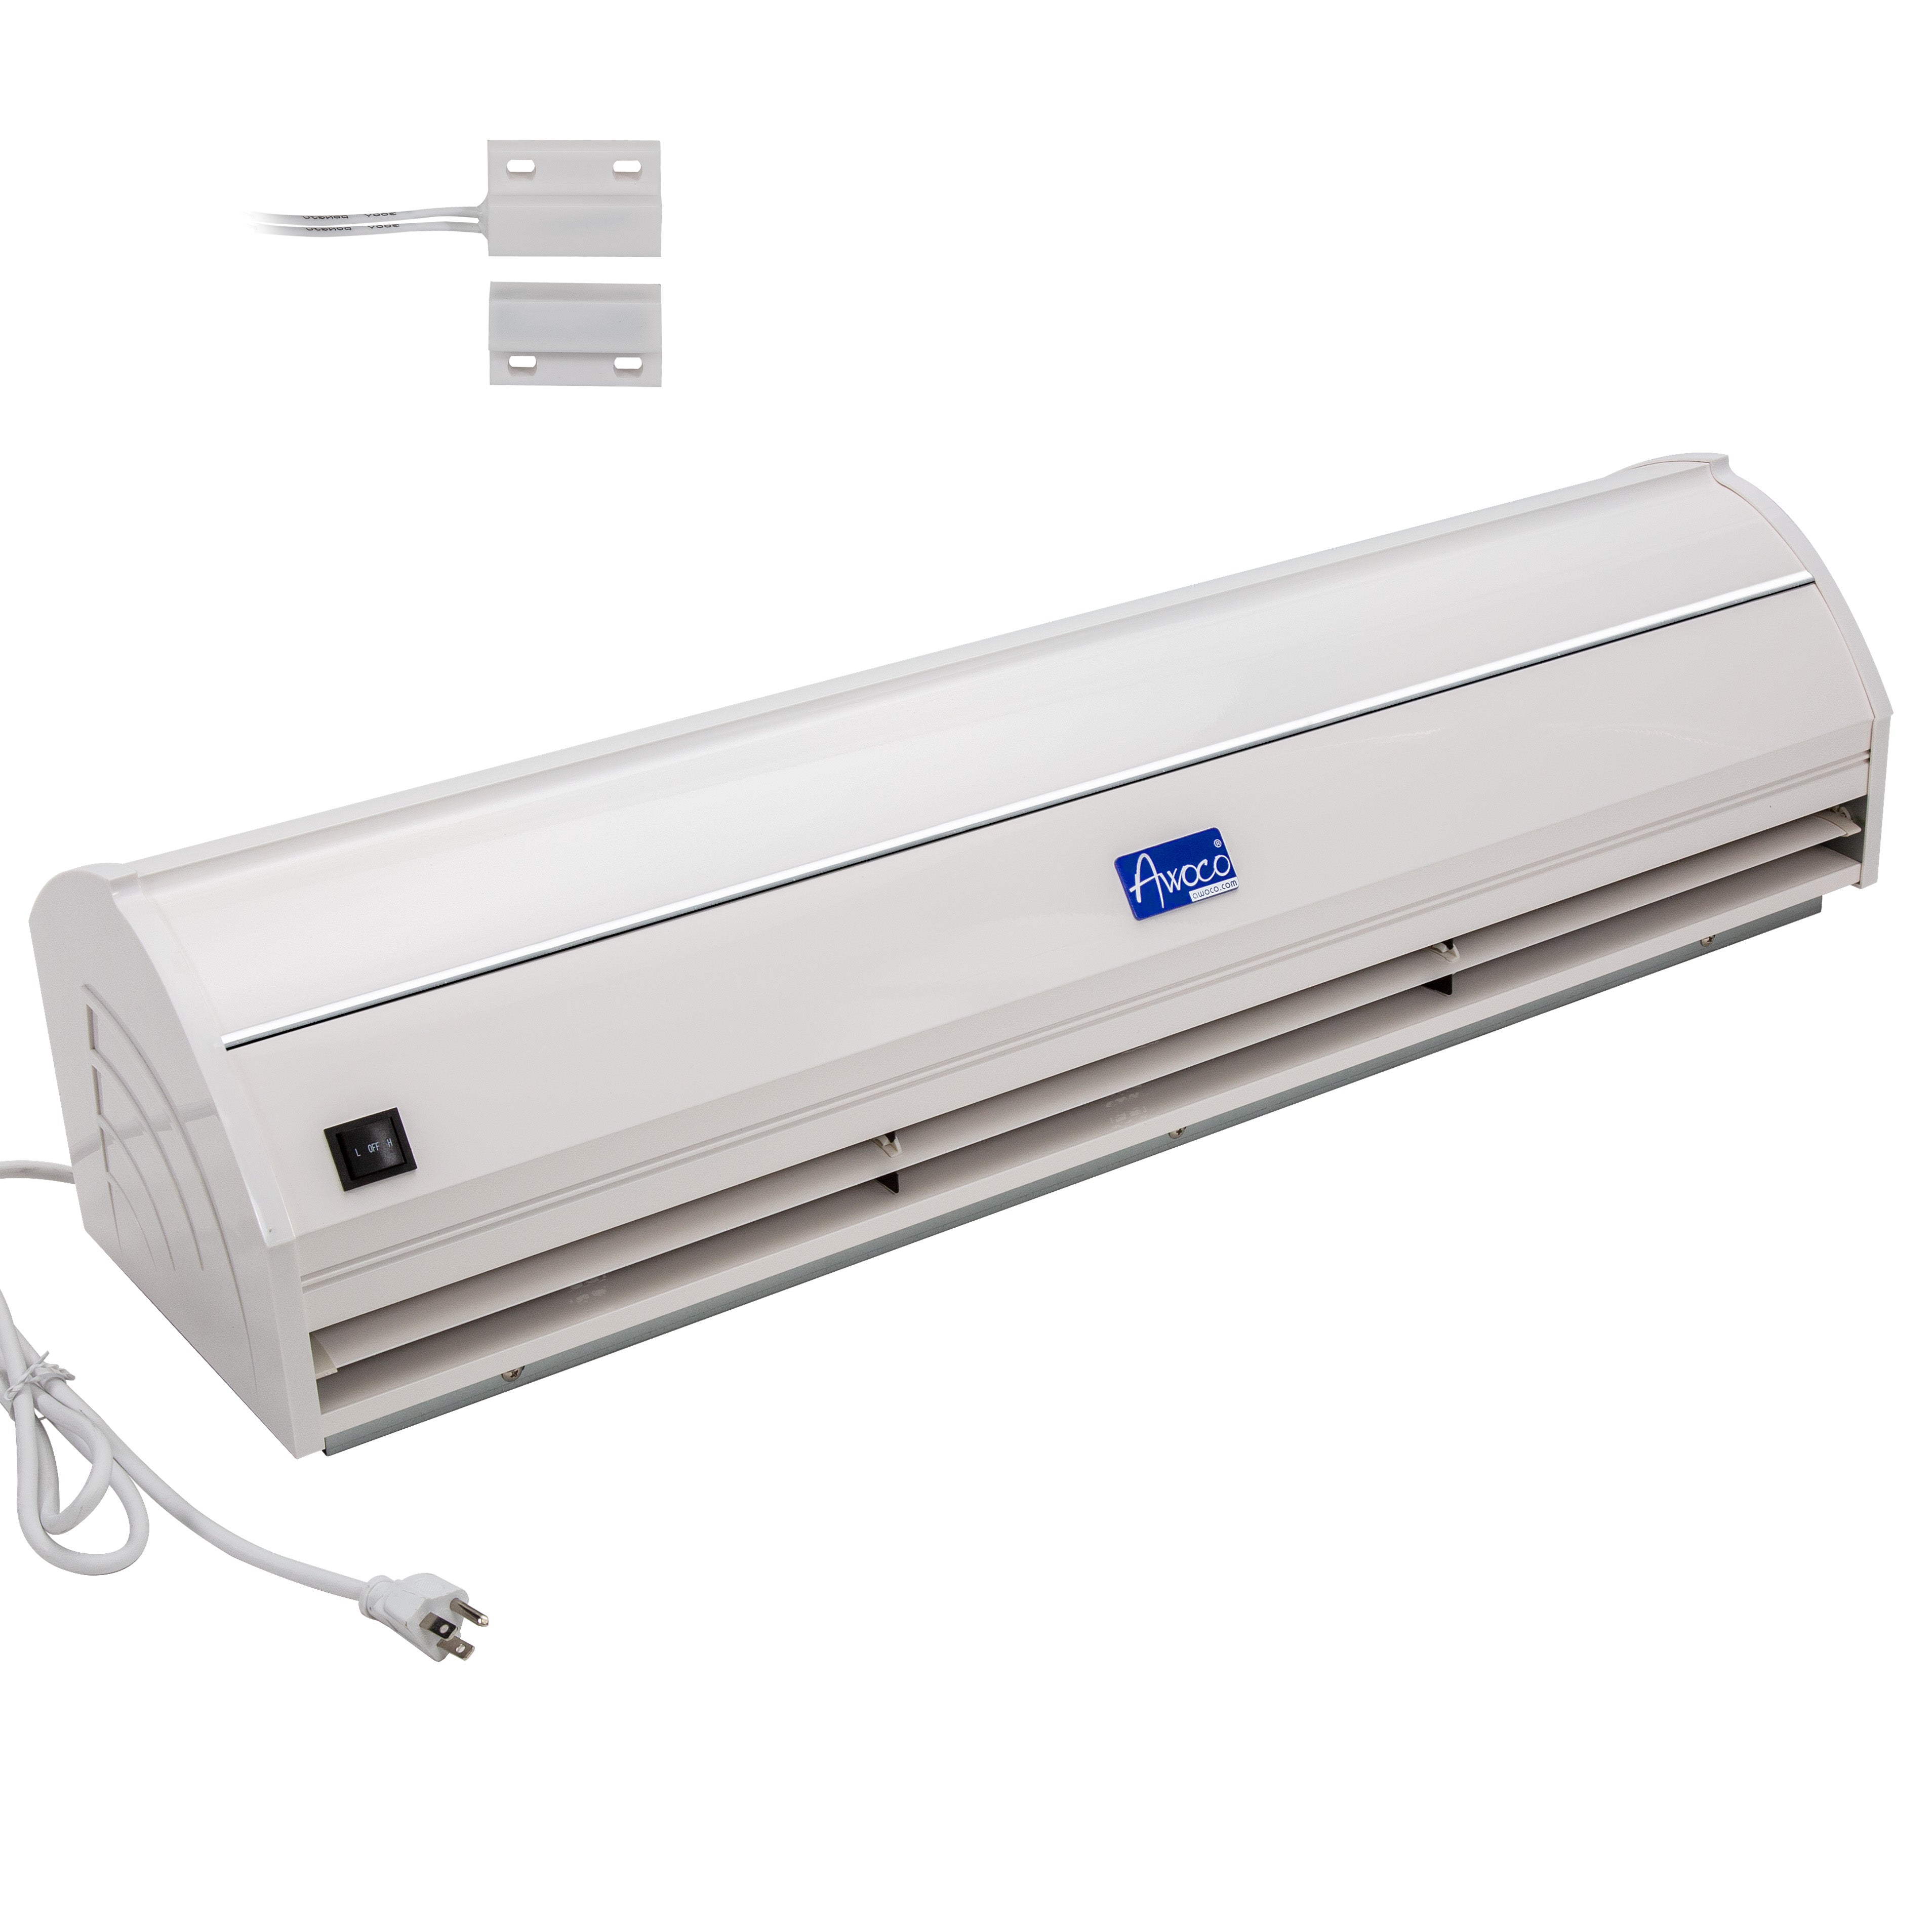 Awoco 36" Elegant 2 Speeds 900 CFM Indoor Air Curtain, UL Certified, 120V Unheated with an Easy-Install Magnetic Door Switch, 3 Year Warranty